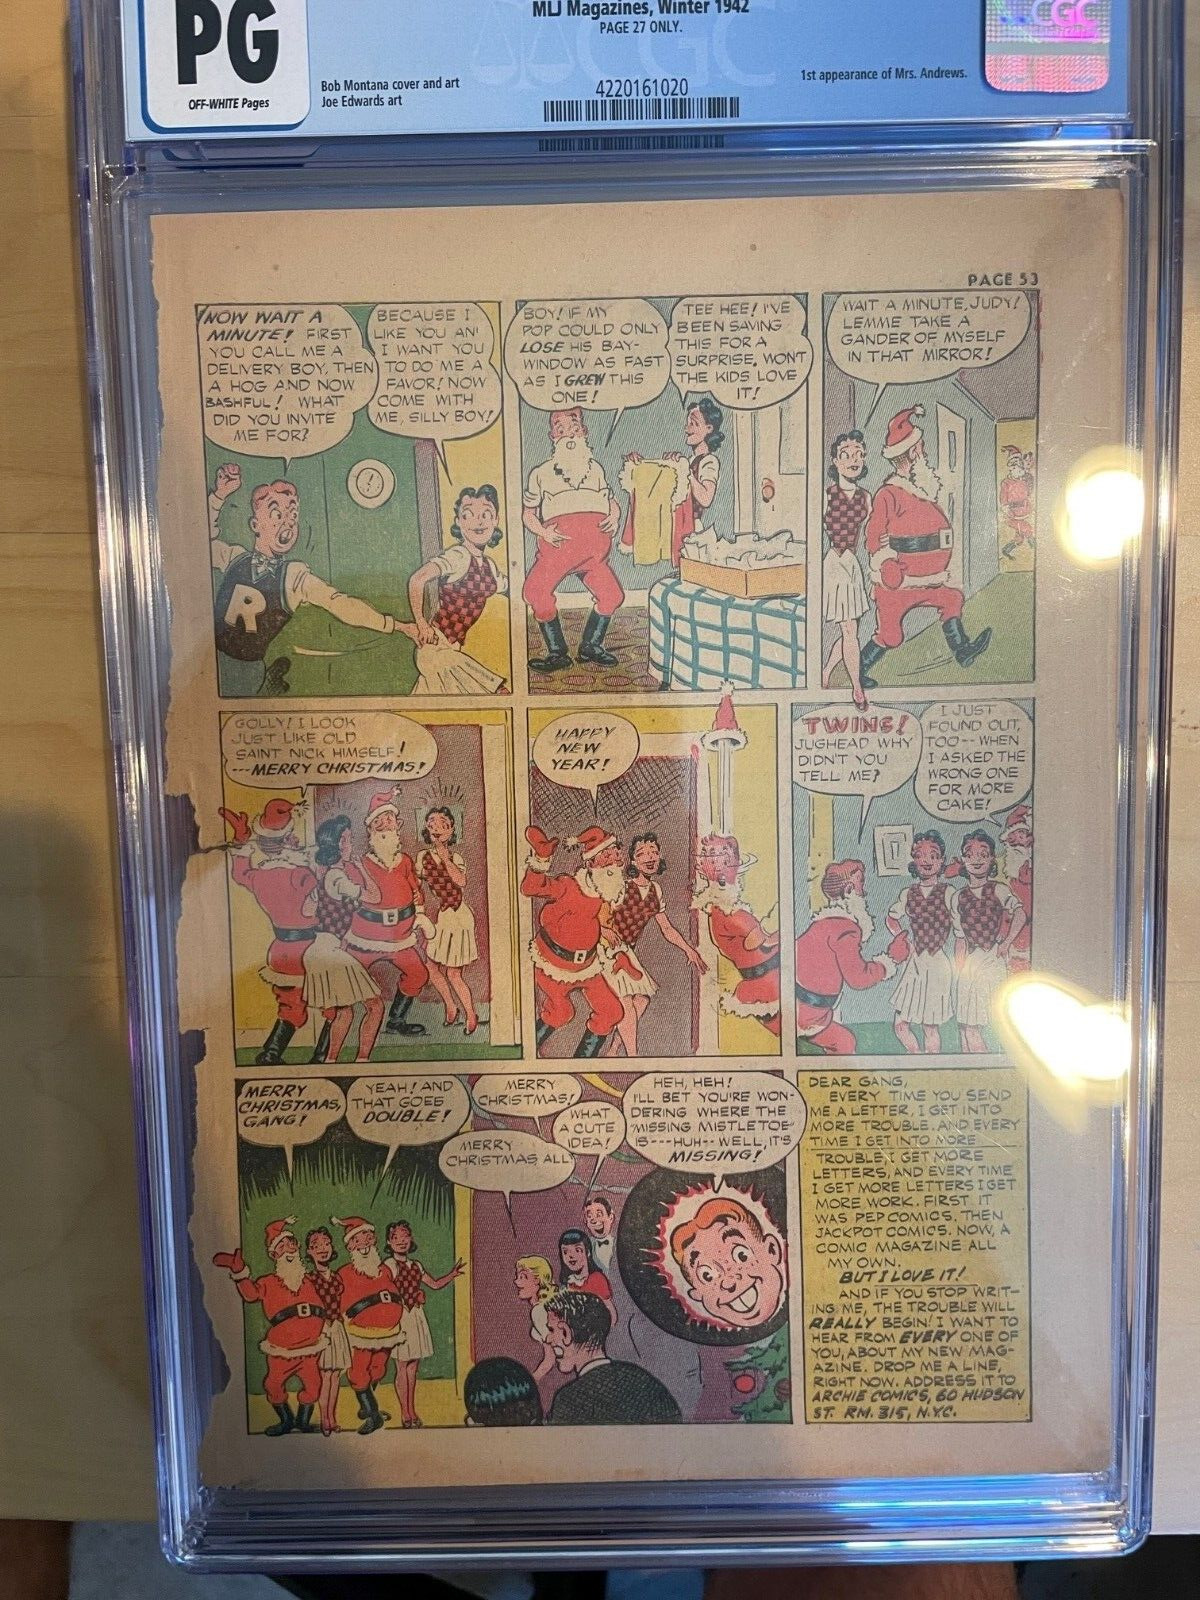 ARCHIE COMICS #1 CGC (Page 27 only) Featuring Archie Jughead Panels 1942 C/OW